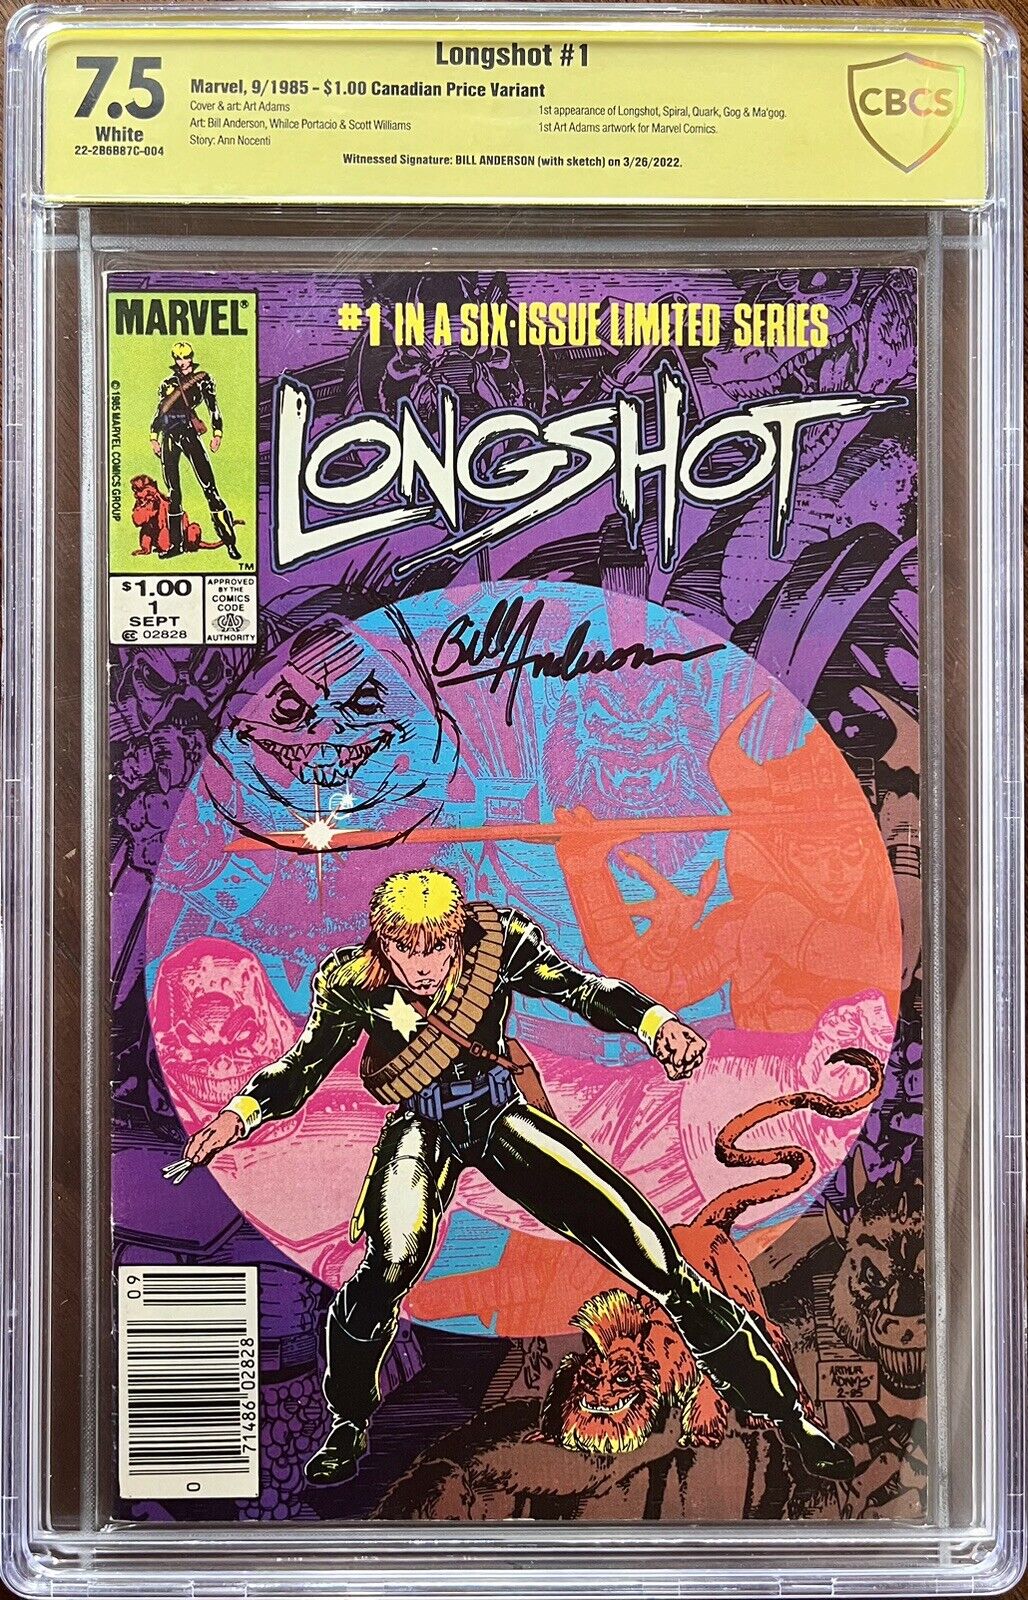 Longshot #1 Marvel Canadian Price Variant - CBCS 7.5 - SKETCHED by Bill Anderson